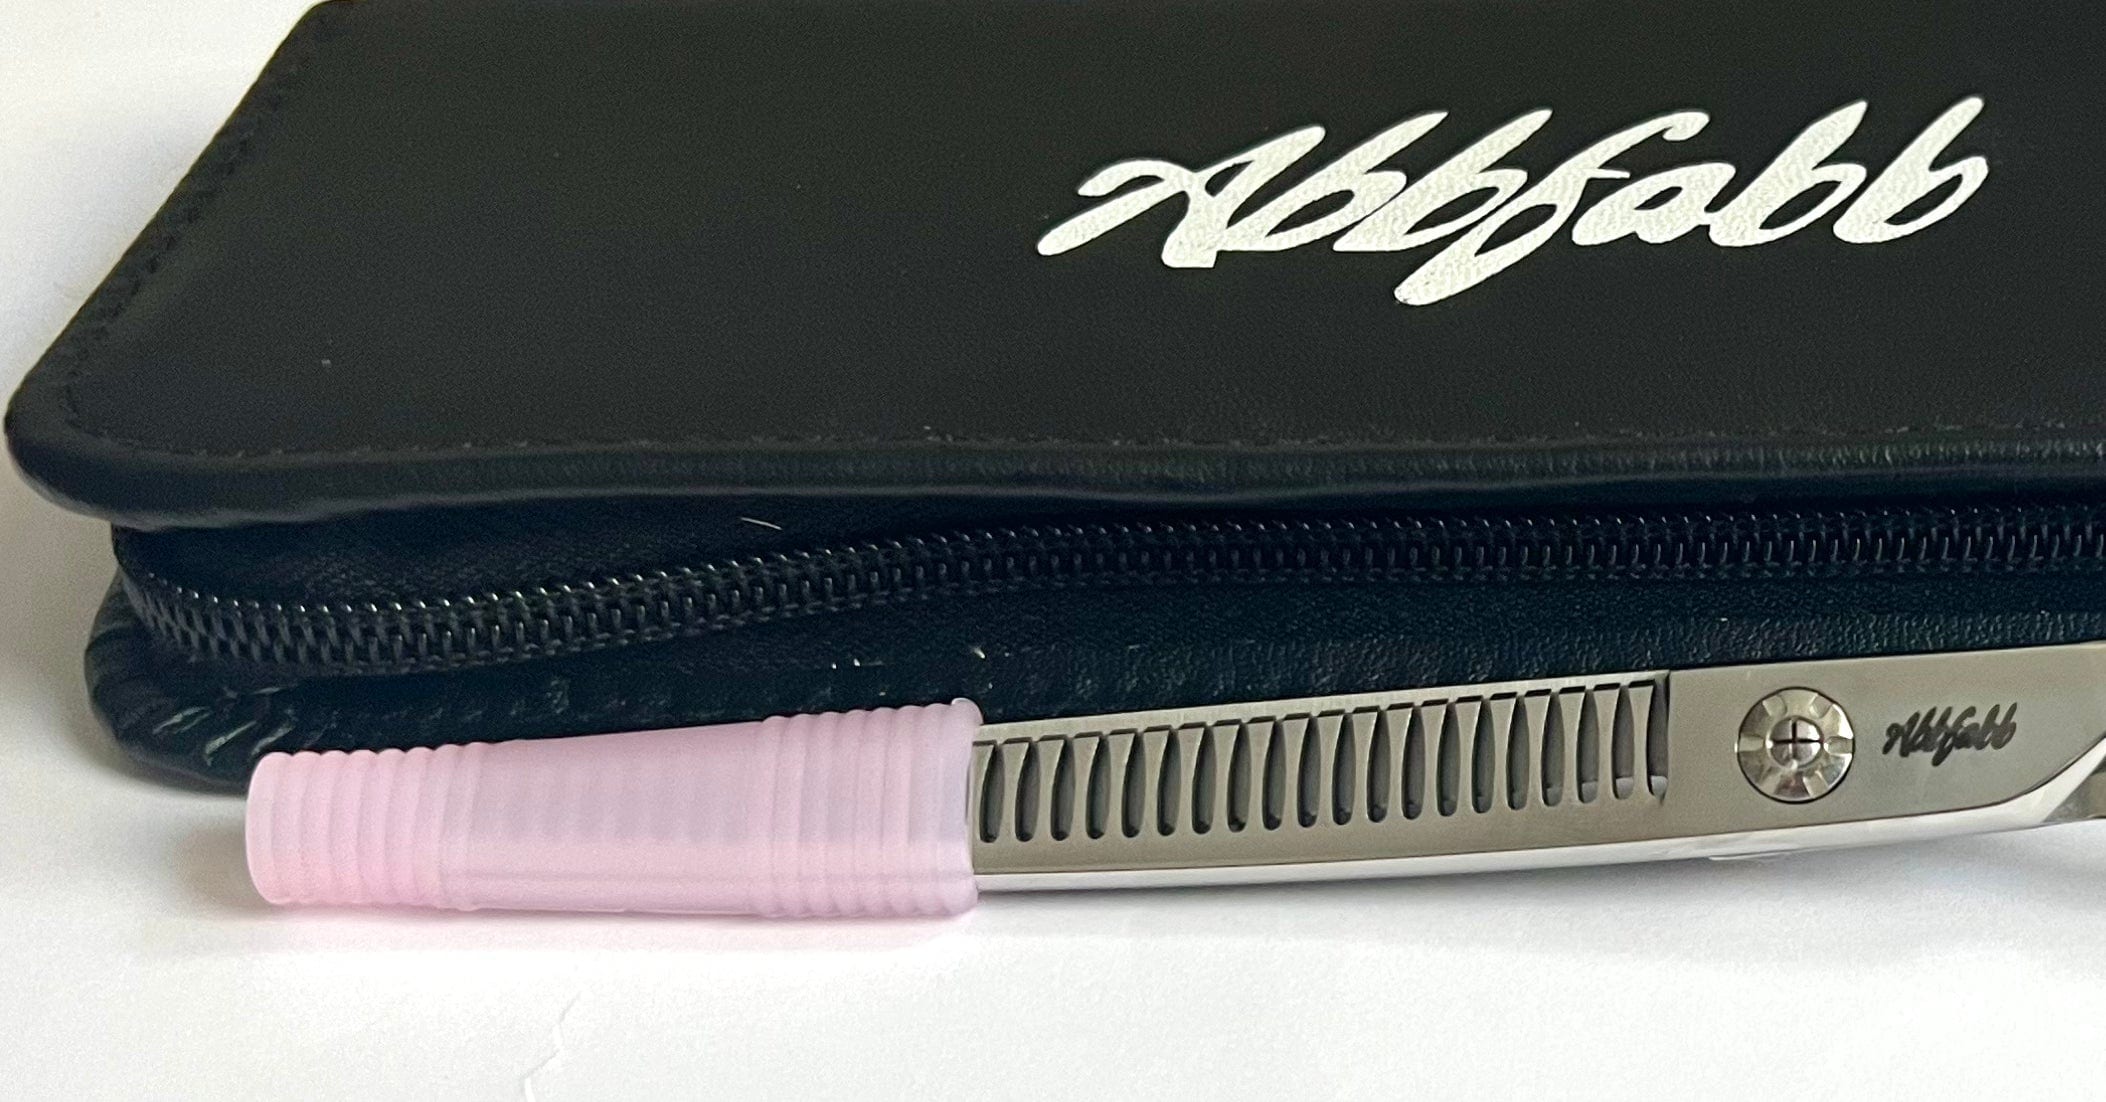 Dog Grooming Scissor Blade and Tip Protector in baby pink by Abbfabb Grooming Scissors Ltd